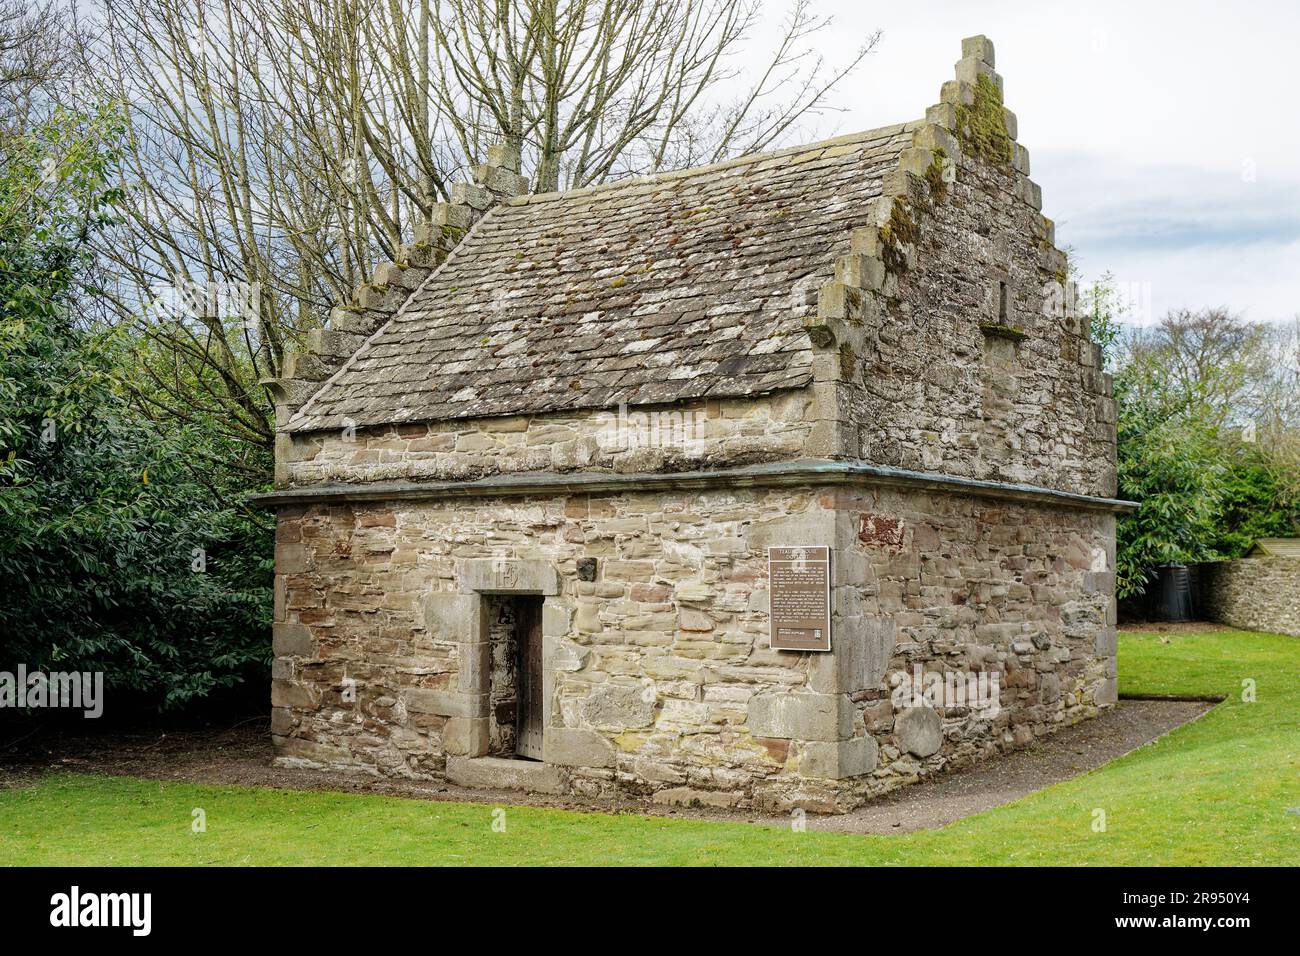 Tealing Dovecot built 1595 by Sir David Maxwell of Tealing near Dundee, Scotland. Exterior. Contained 500+ pigeon nesting boxes. Source of winter food Stock Photo